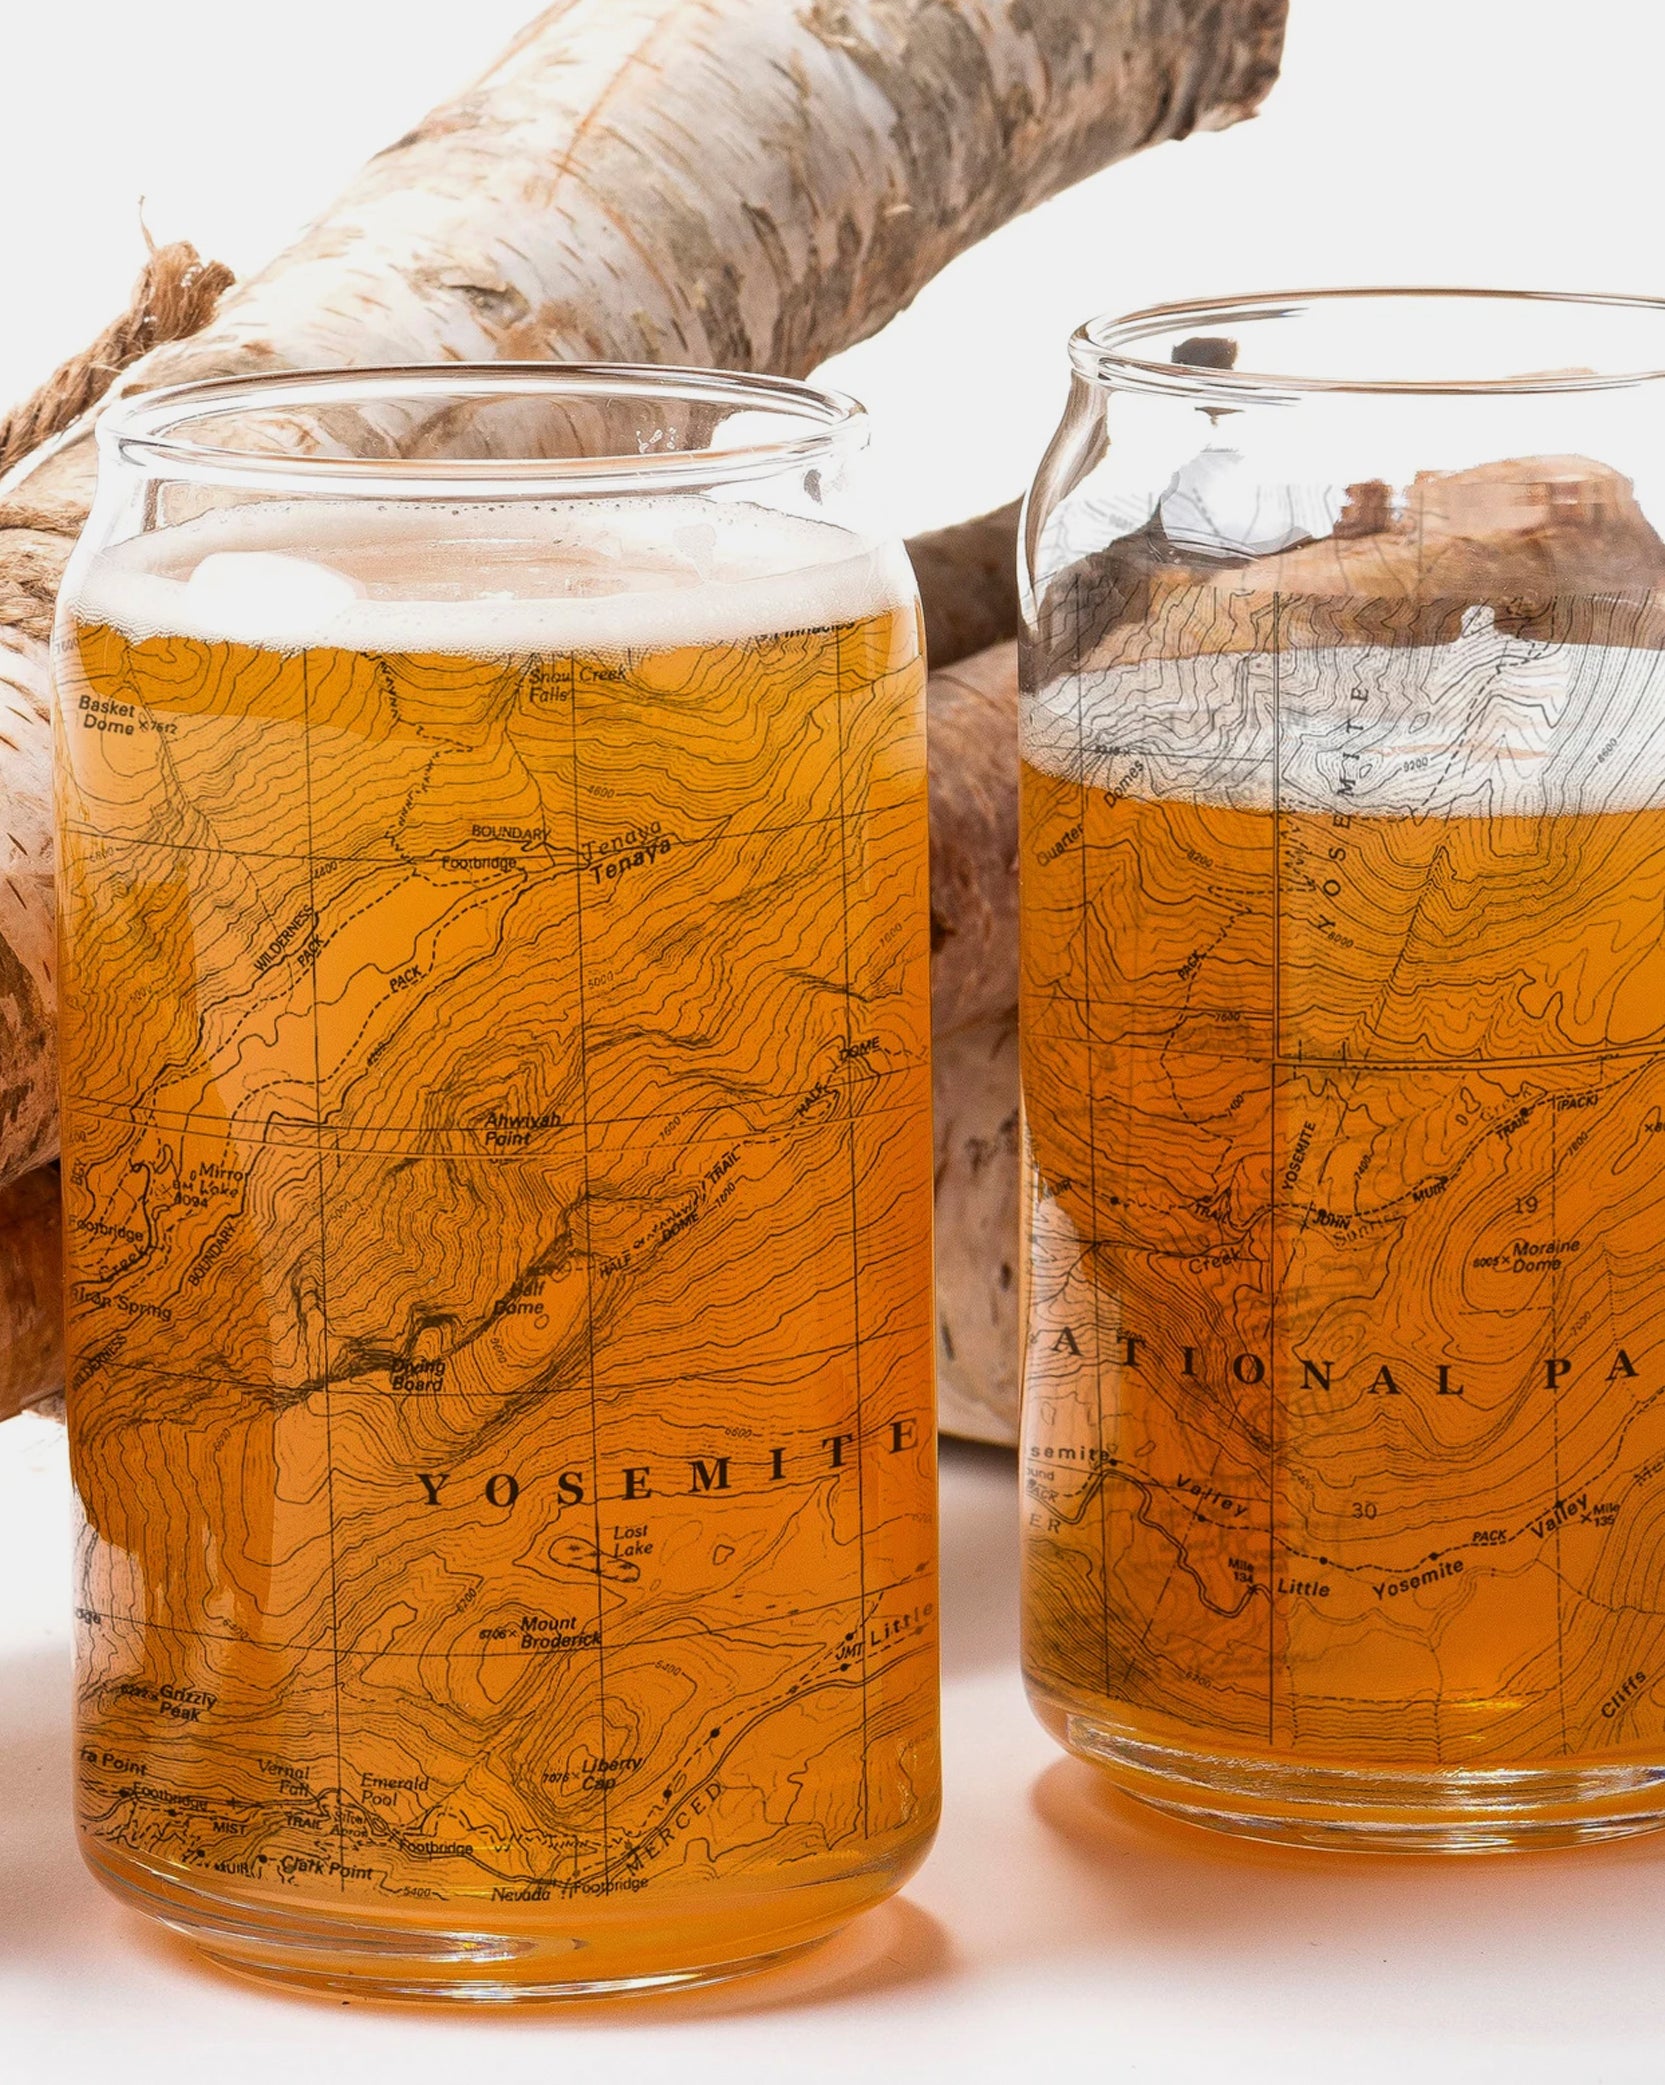 Yosemite National Park Topgraphic Map Can Glasses 2